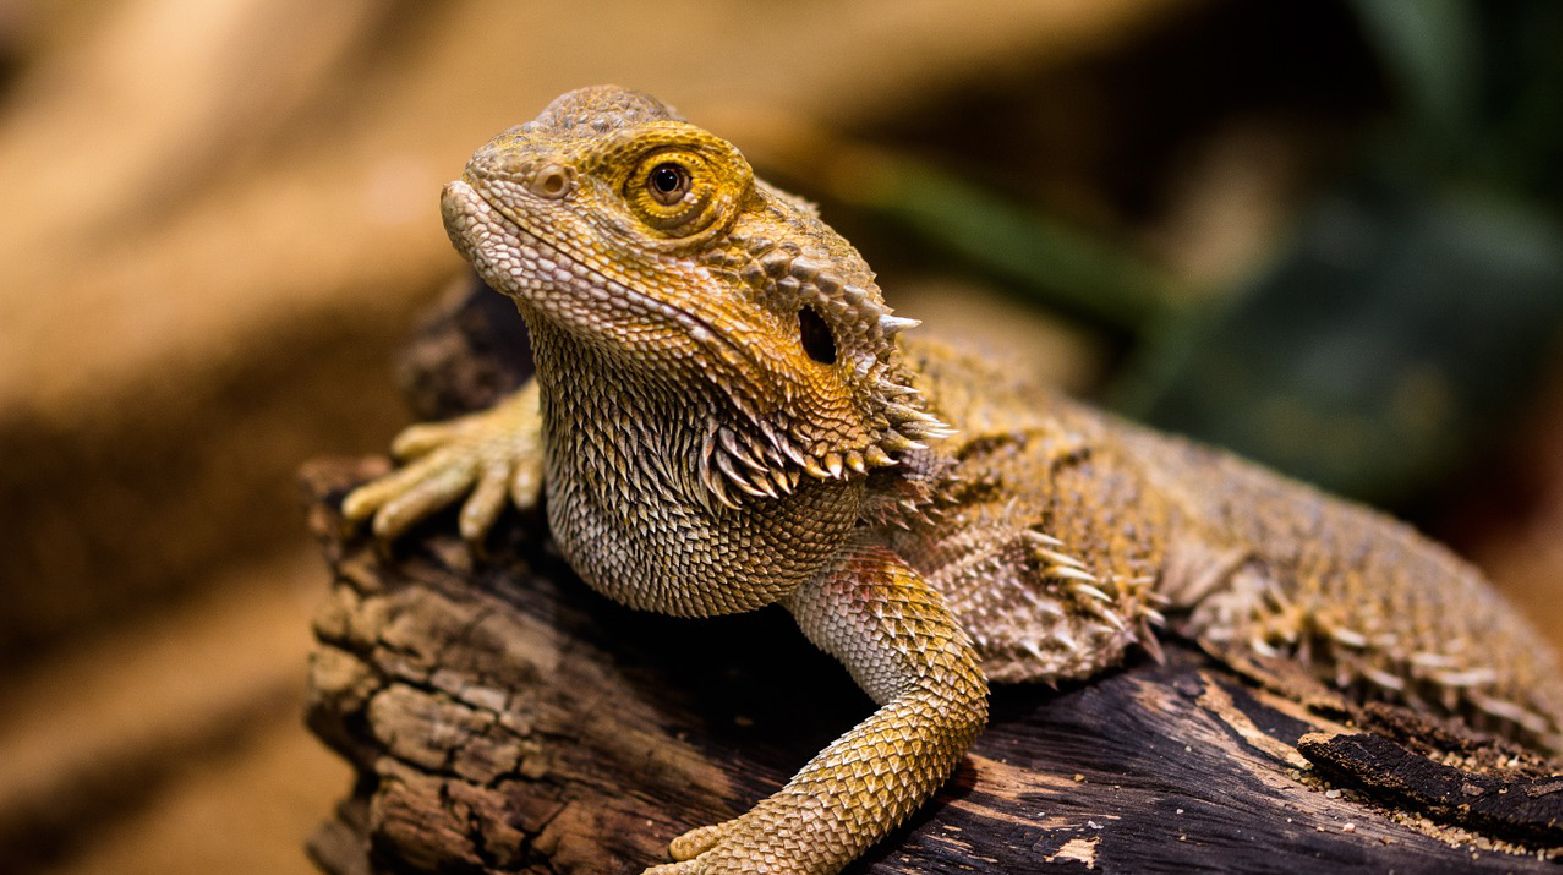 What Wattage Heat Lamp For A Bearded Dragon